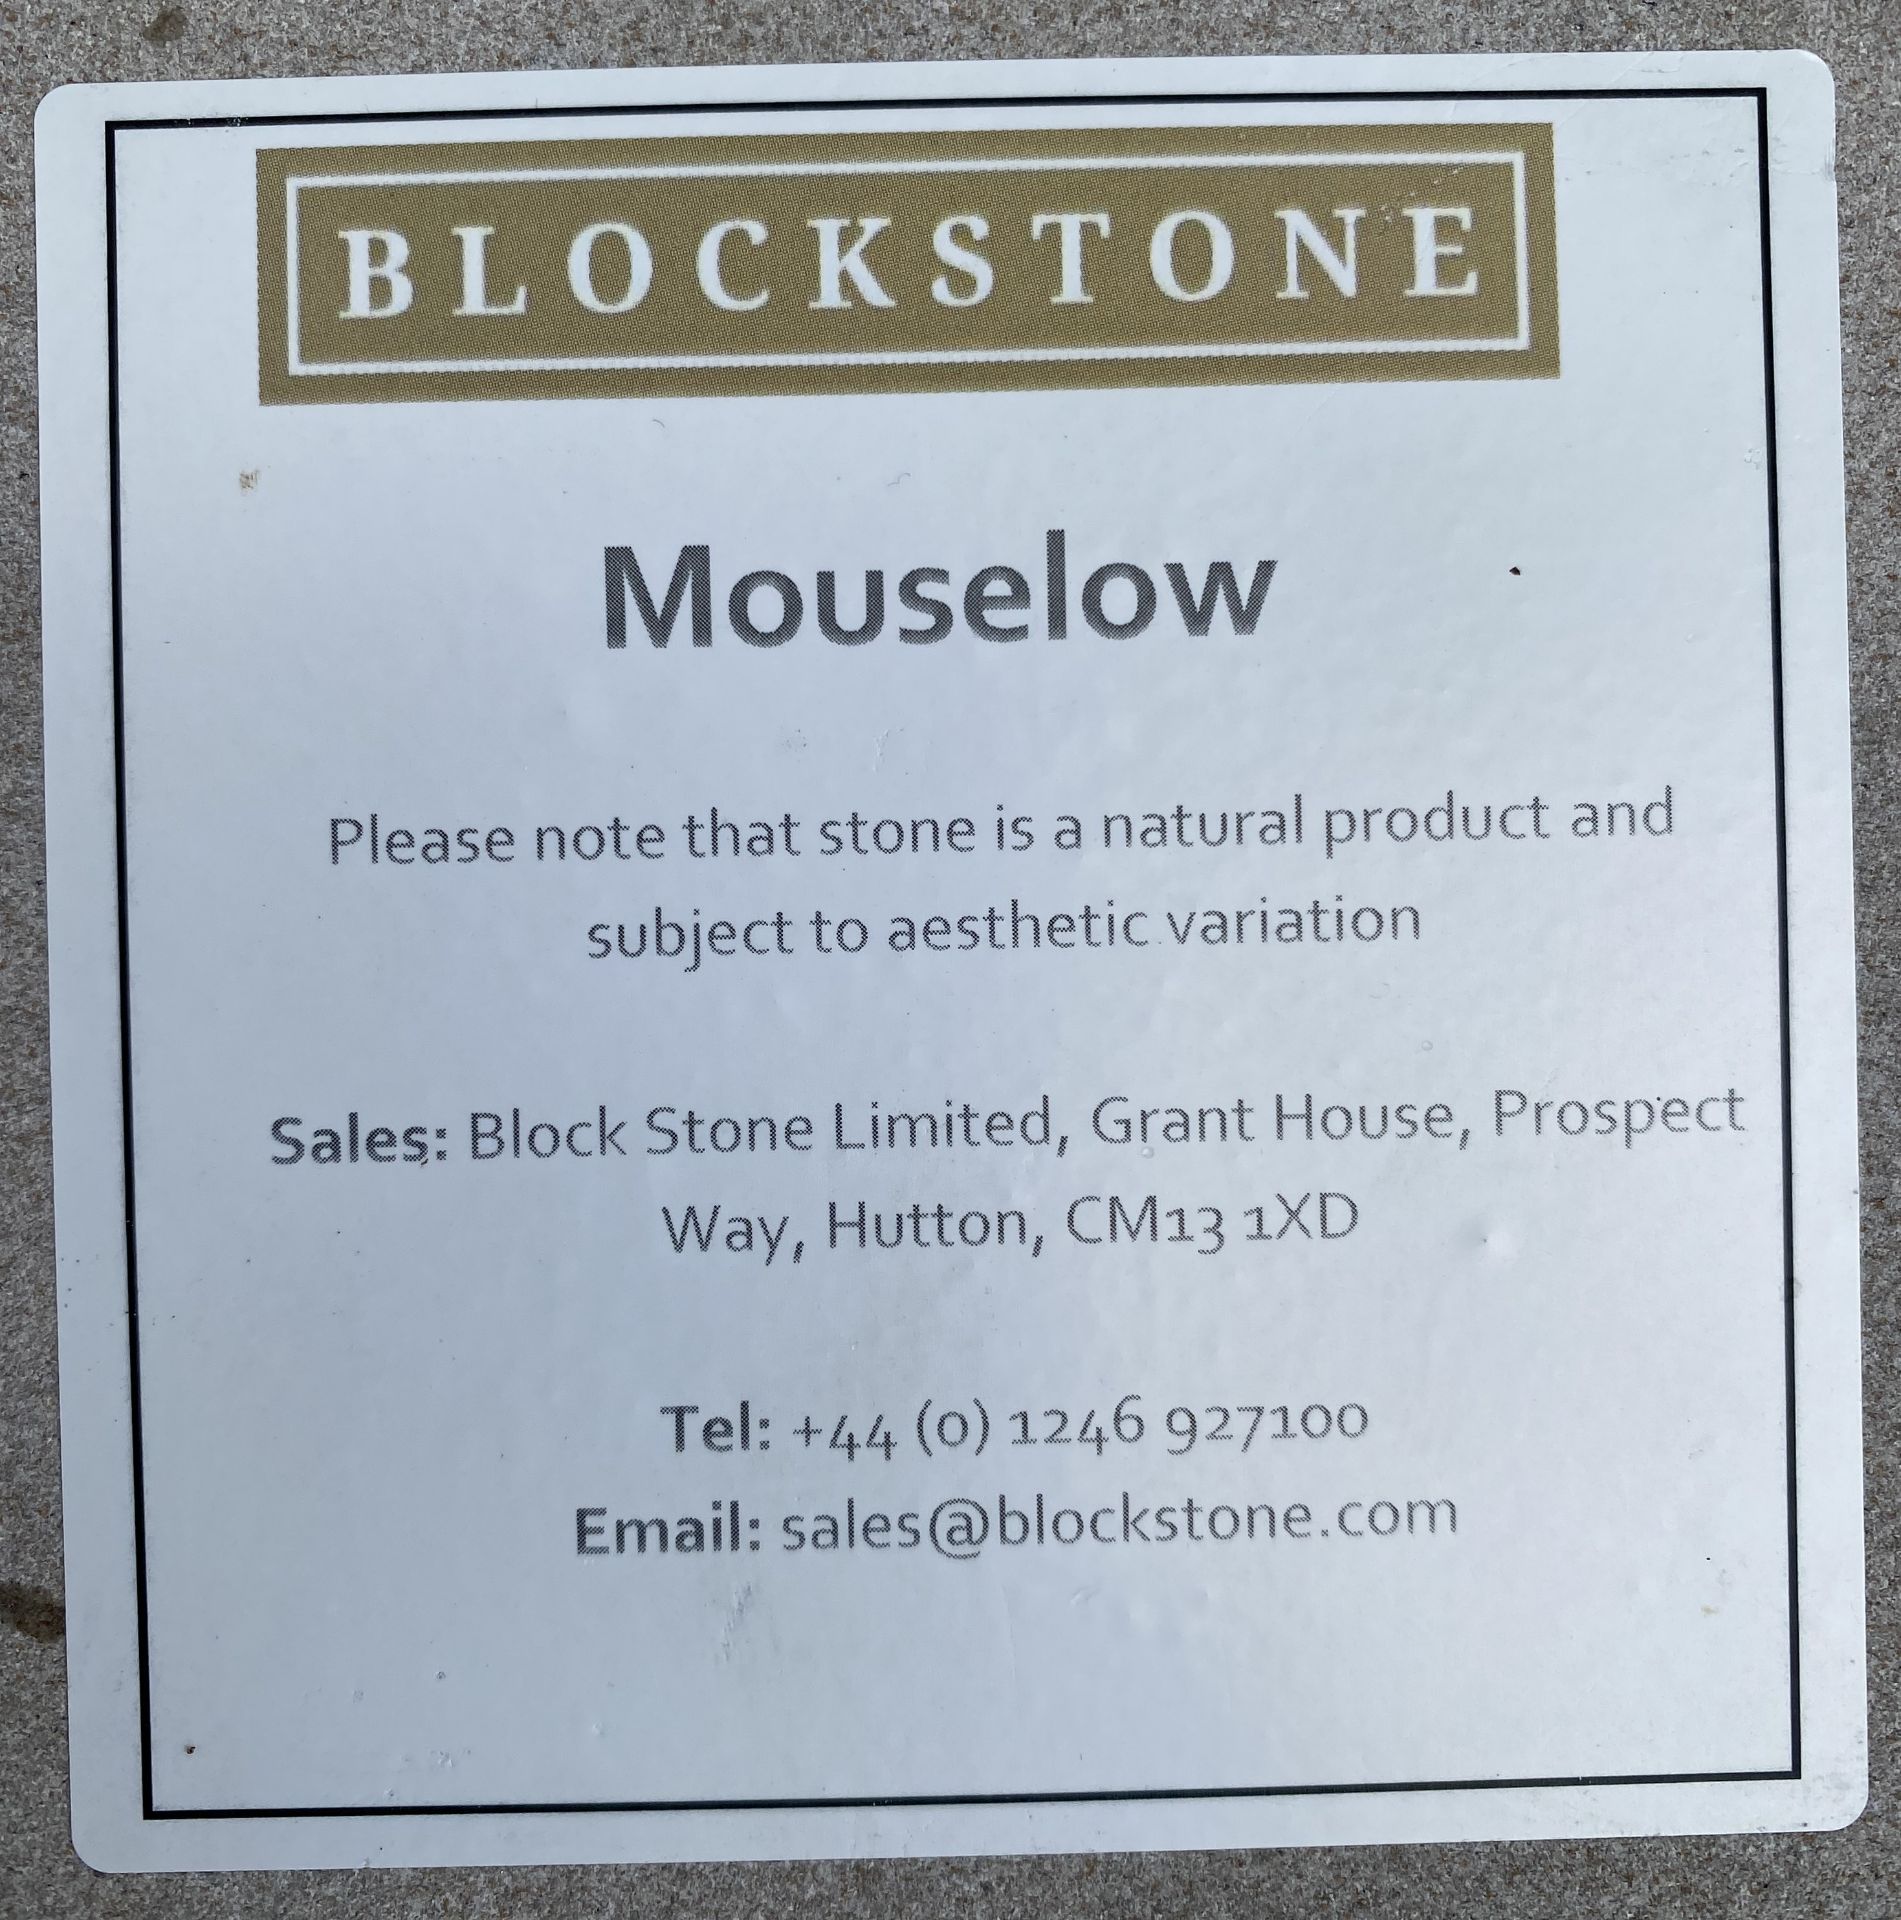 Contents to 3 pallets of BLOCKSTONE MOUSELOW NATURAL SANDSTONE, RUBBED FINISH FACING/PATIO STONE. - Image 8 of 8